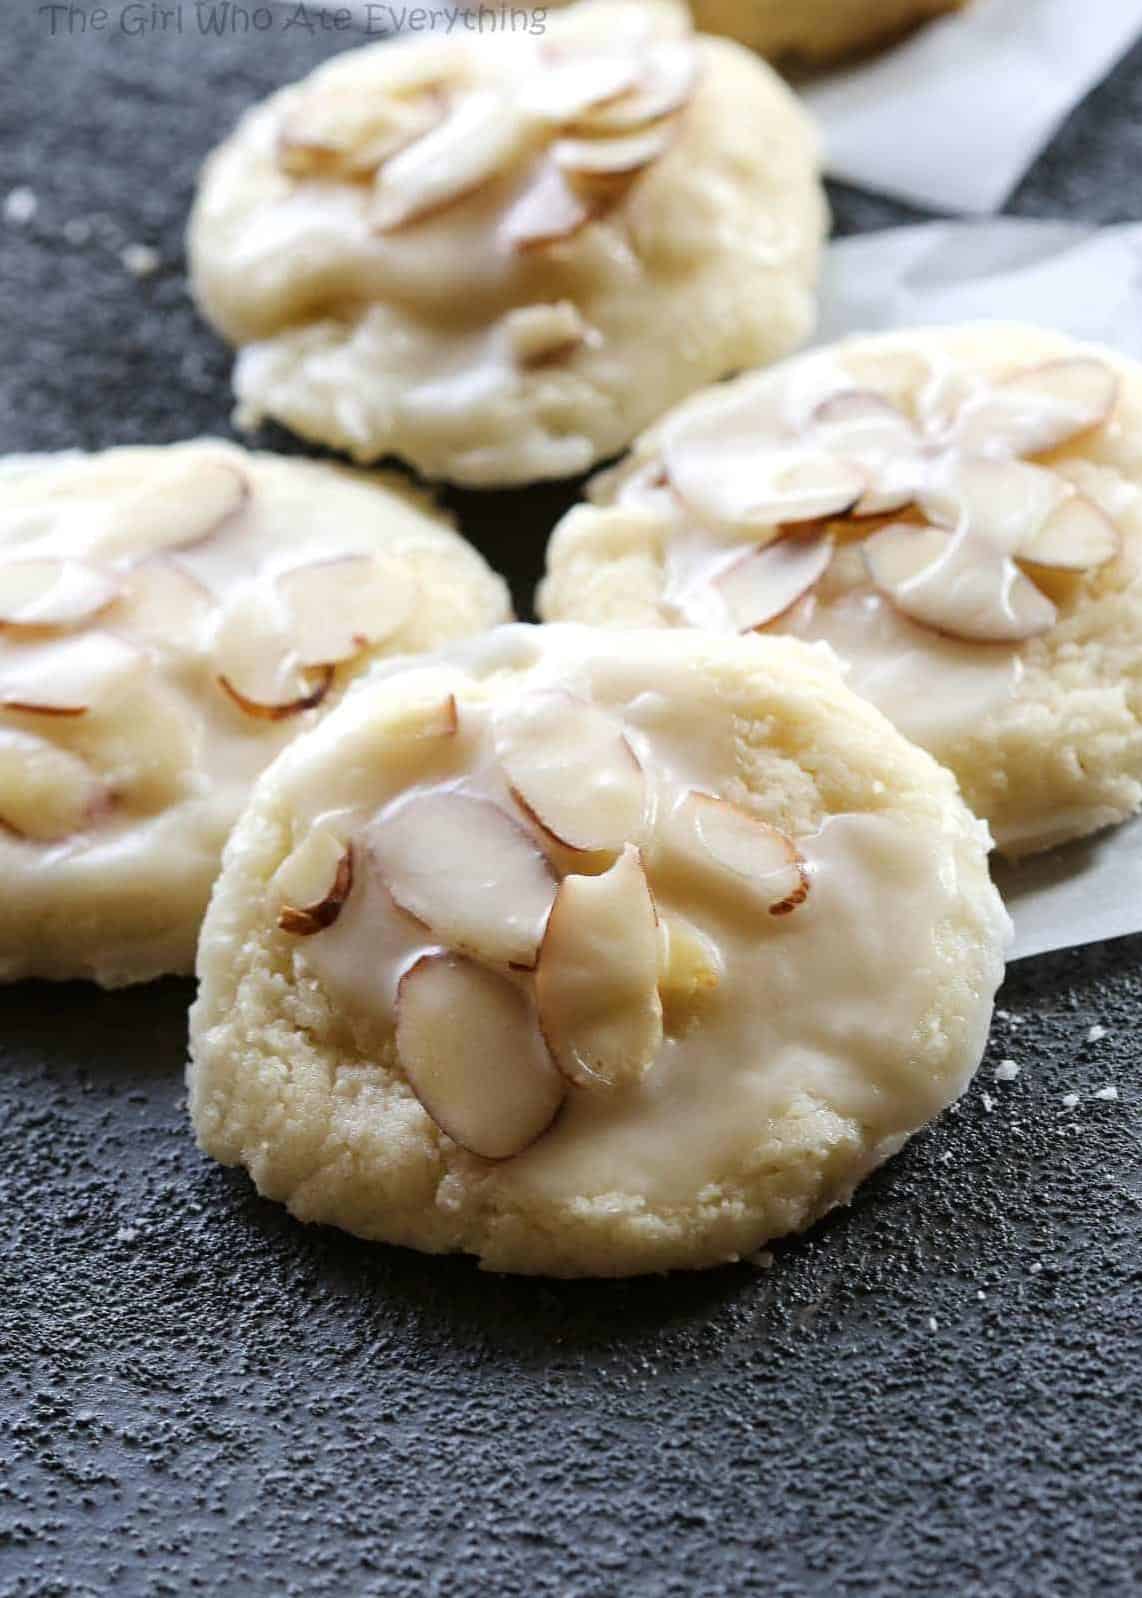  Get ready to fall in love with these soft and chewy almond cookies.